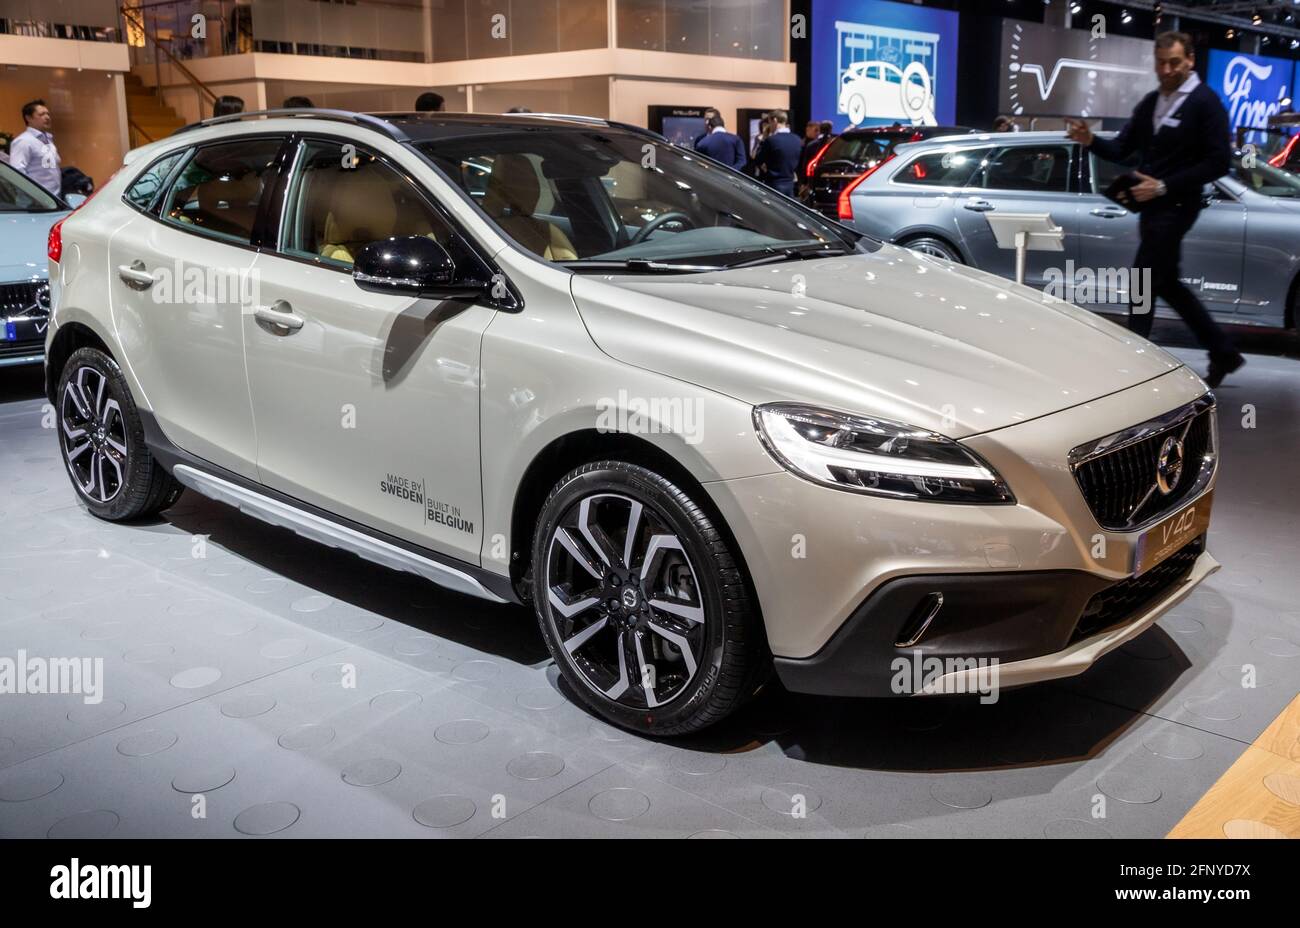 Volvo V40 Cross Country car showcased at the Brussels Expo Autosalon motor show. Belgium - January 19, 2017 Stock Photo